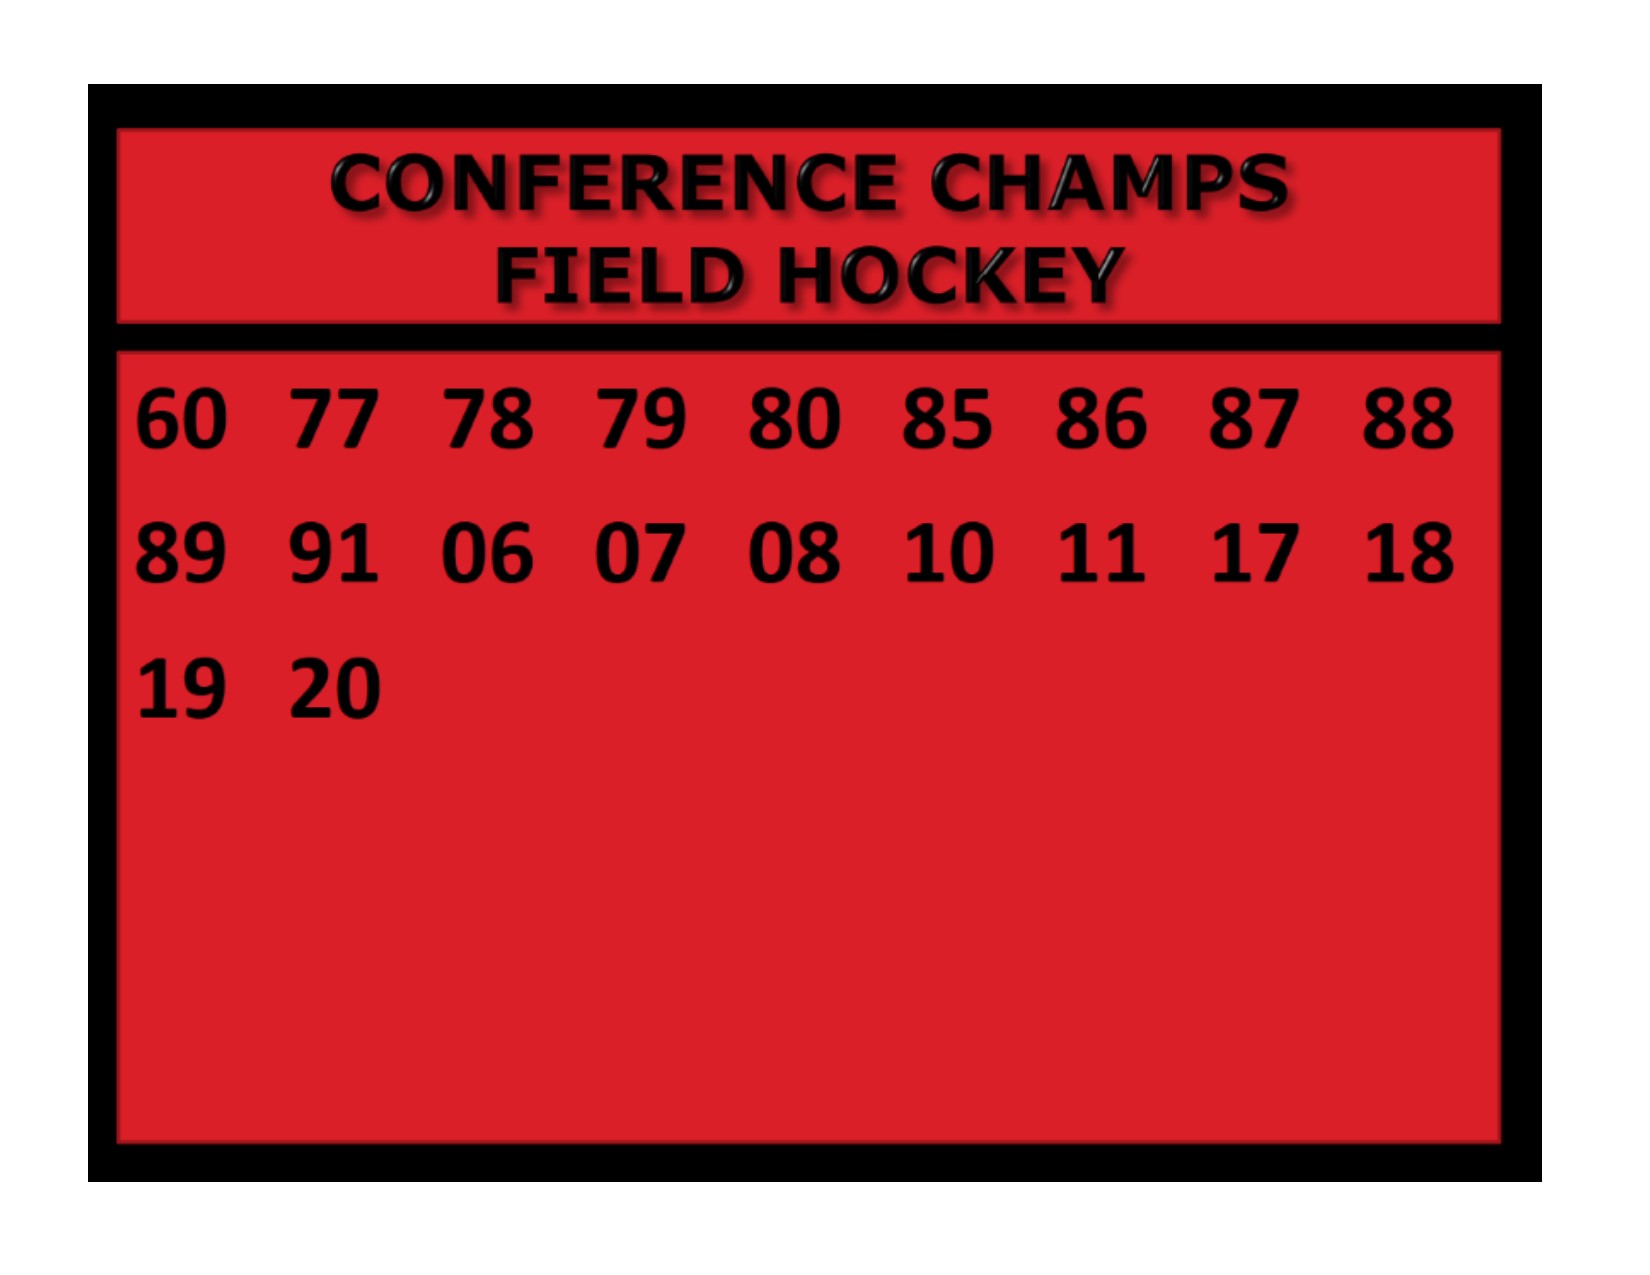 Field Hockey Conference Titles